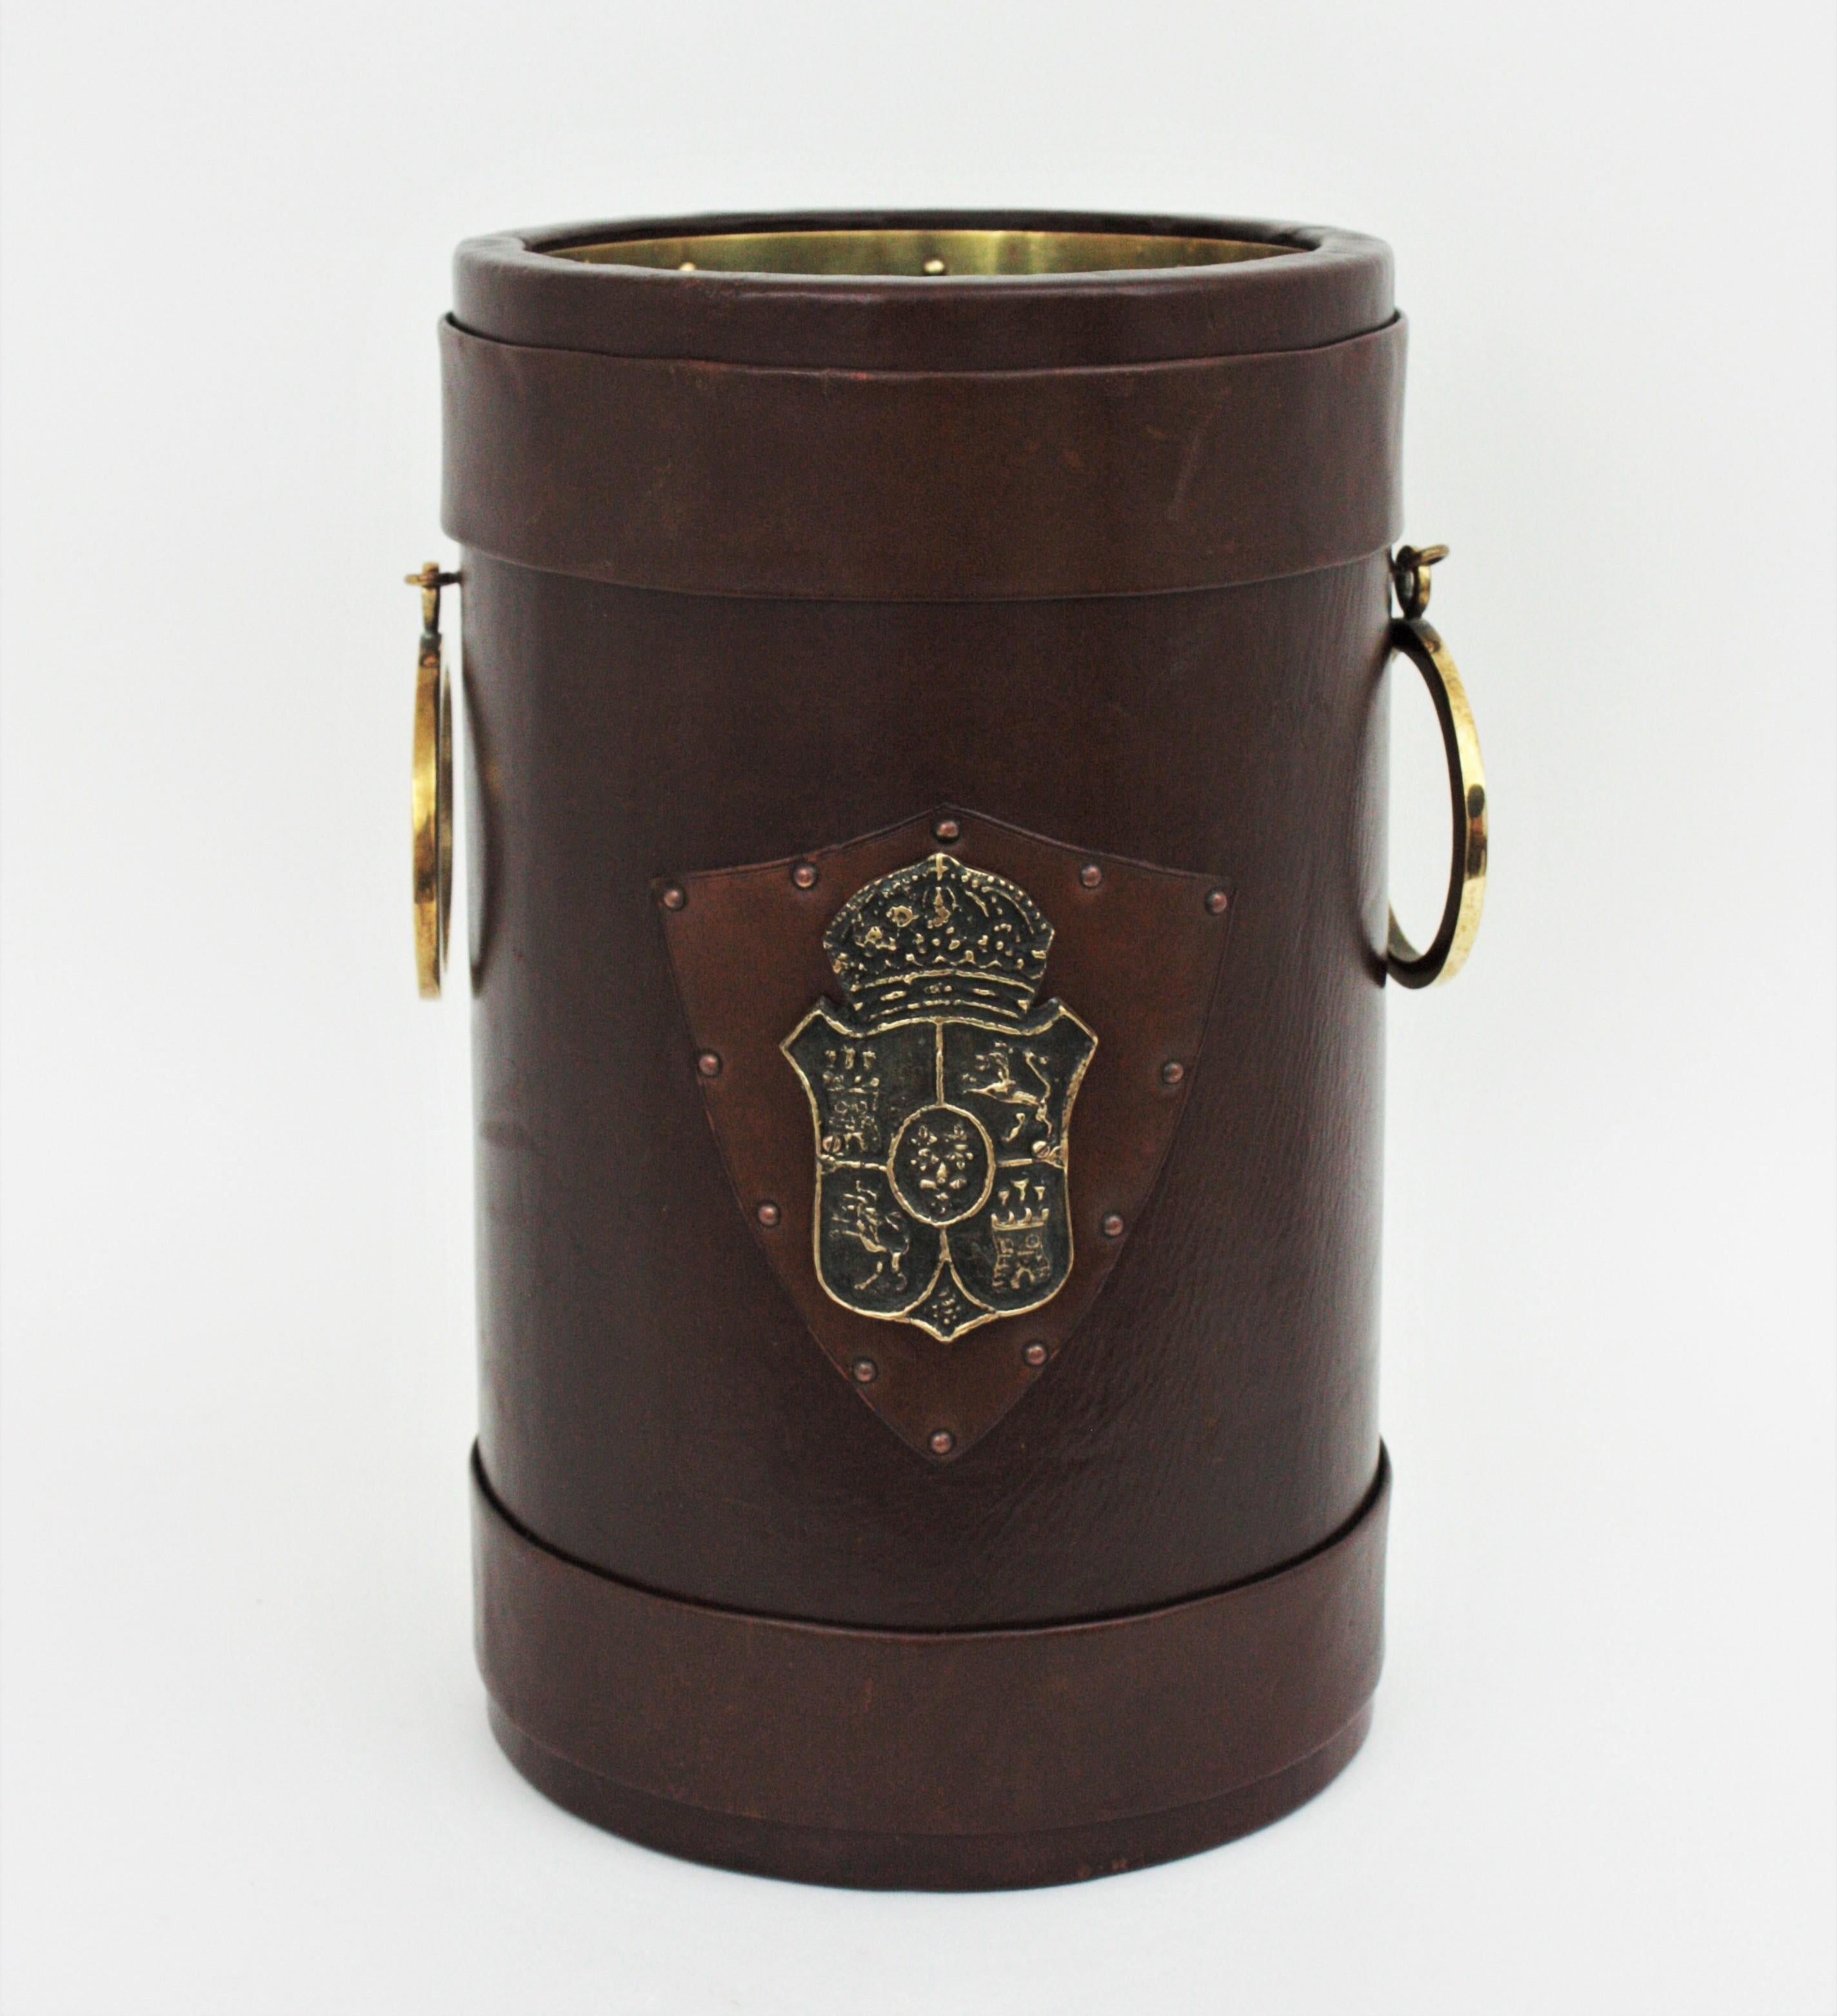 Umbrella stand or waste basket bin with handles and decorative coat of arms, leather, wood, brass. Spain, 1960s
This leather, metal and wood wastebasket from Spain has a beautiful design with brass handles both sides and the spanish coat of arms at